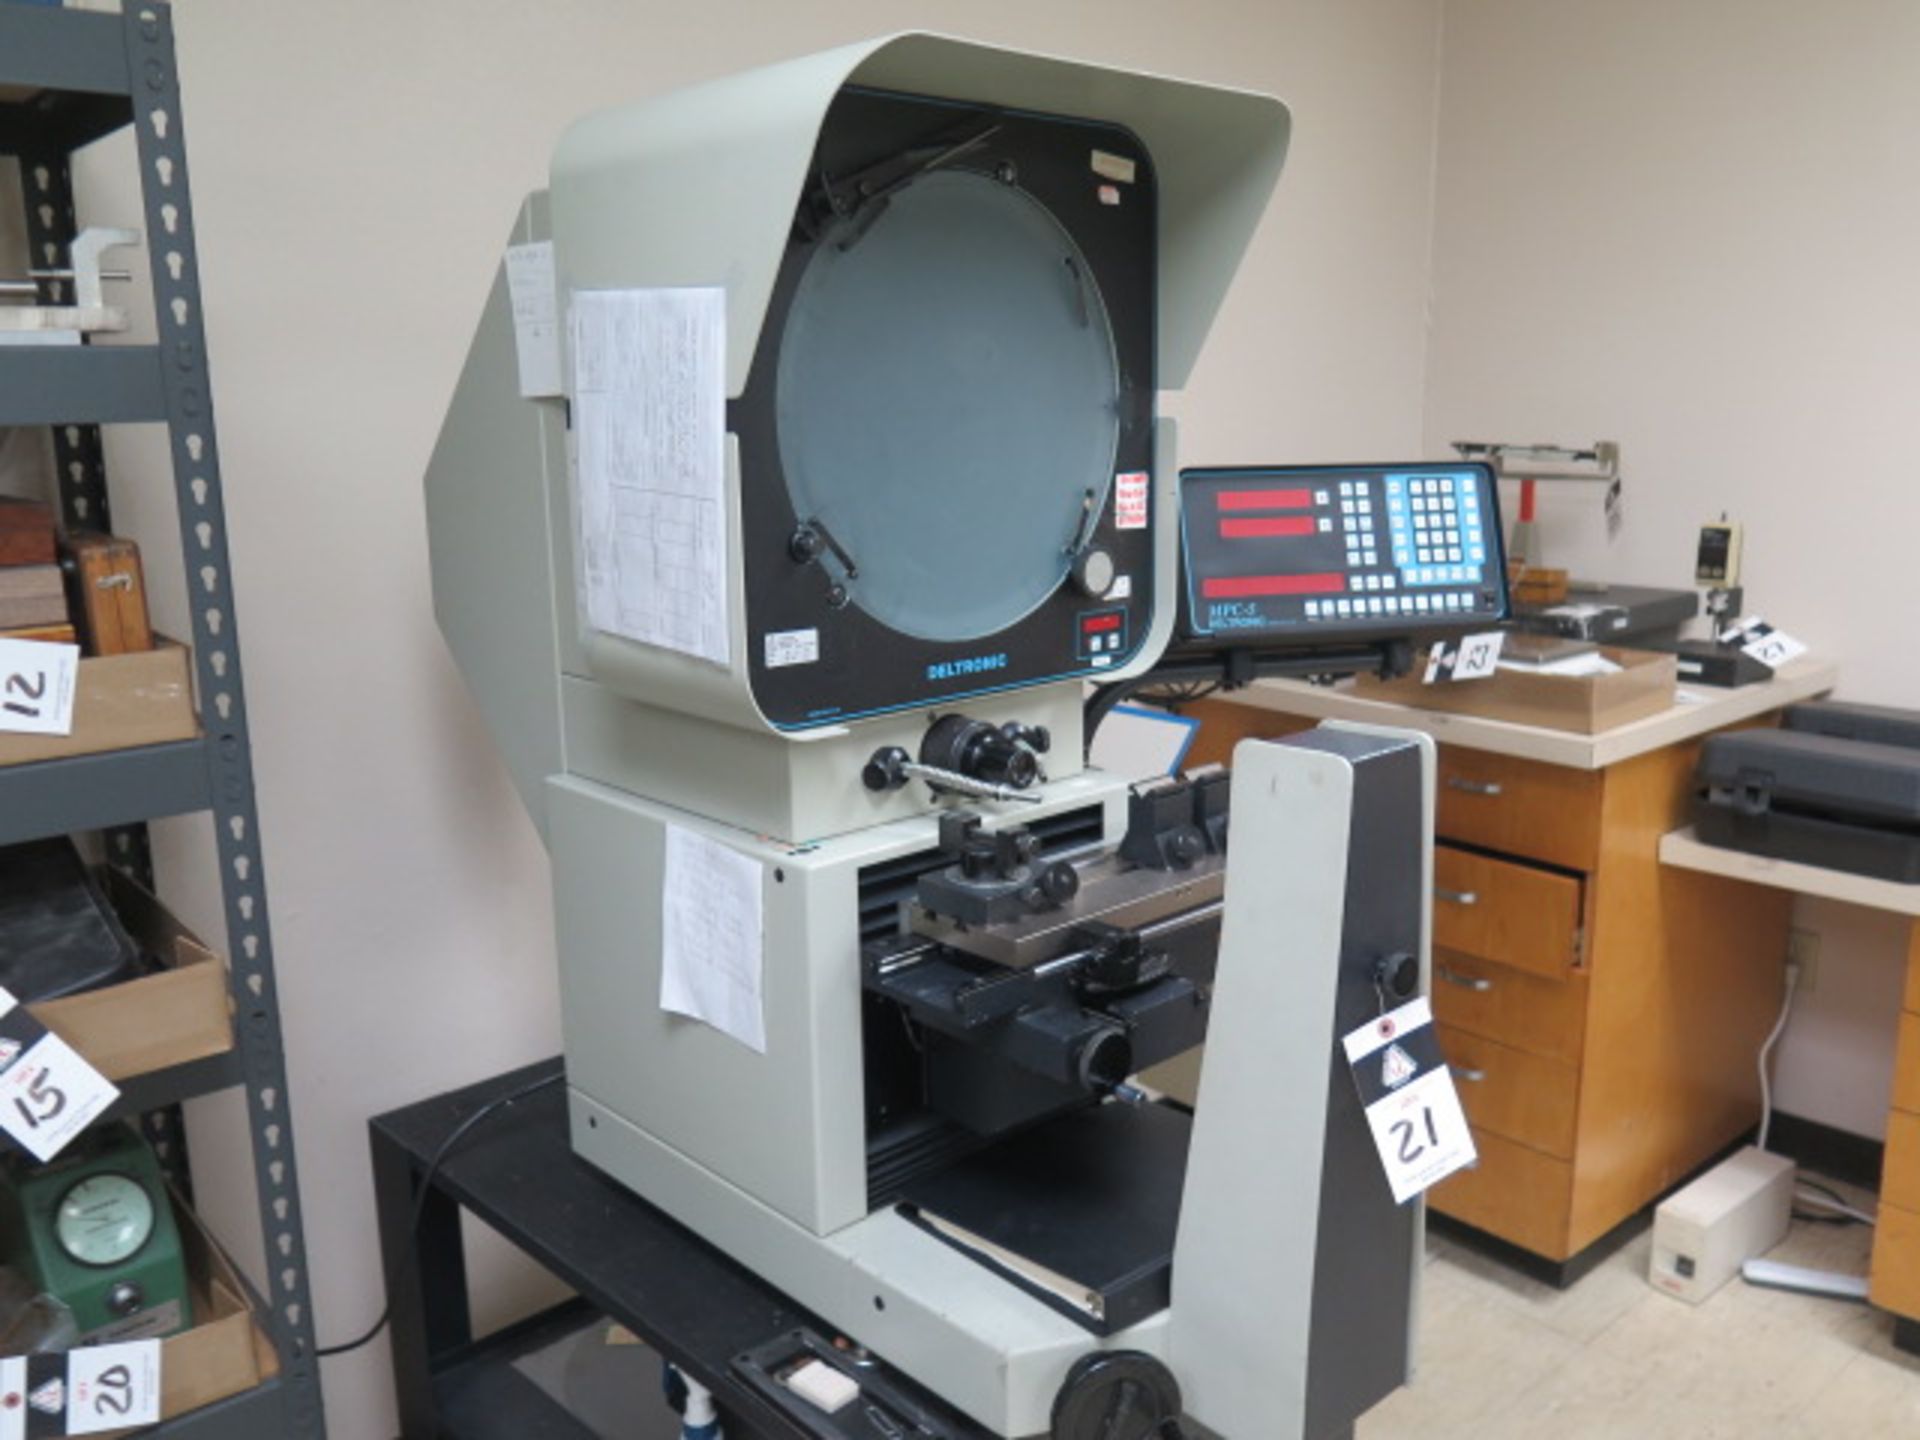 Deltronic DH214-MPC5E 14” Optical Comparator s/n 259074202 w/Deltronic MPC-5 Programmable SOLD AS IS - Image 3 of 12